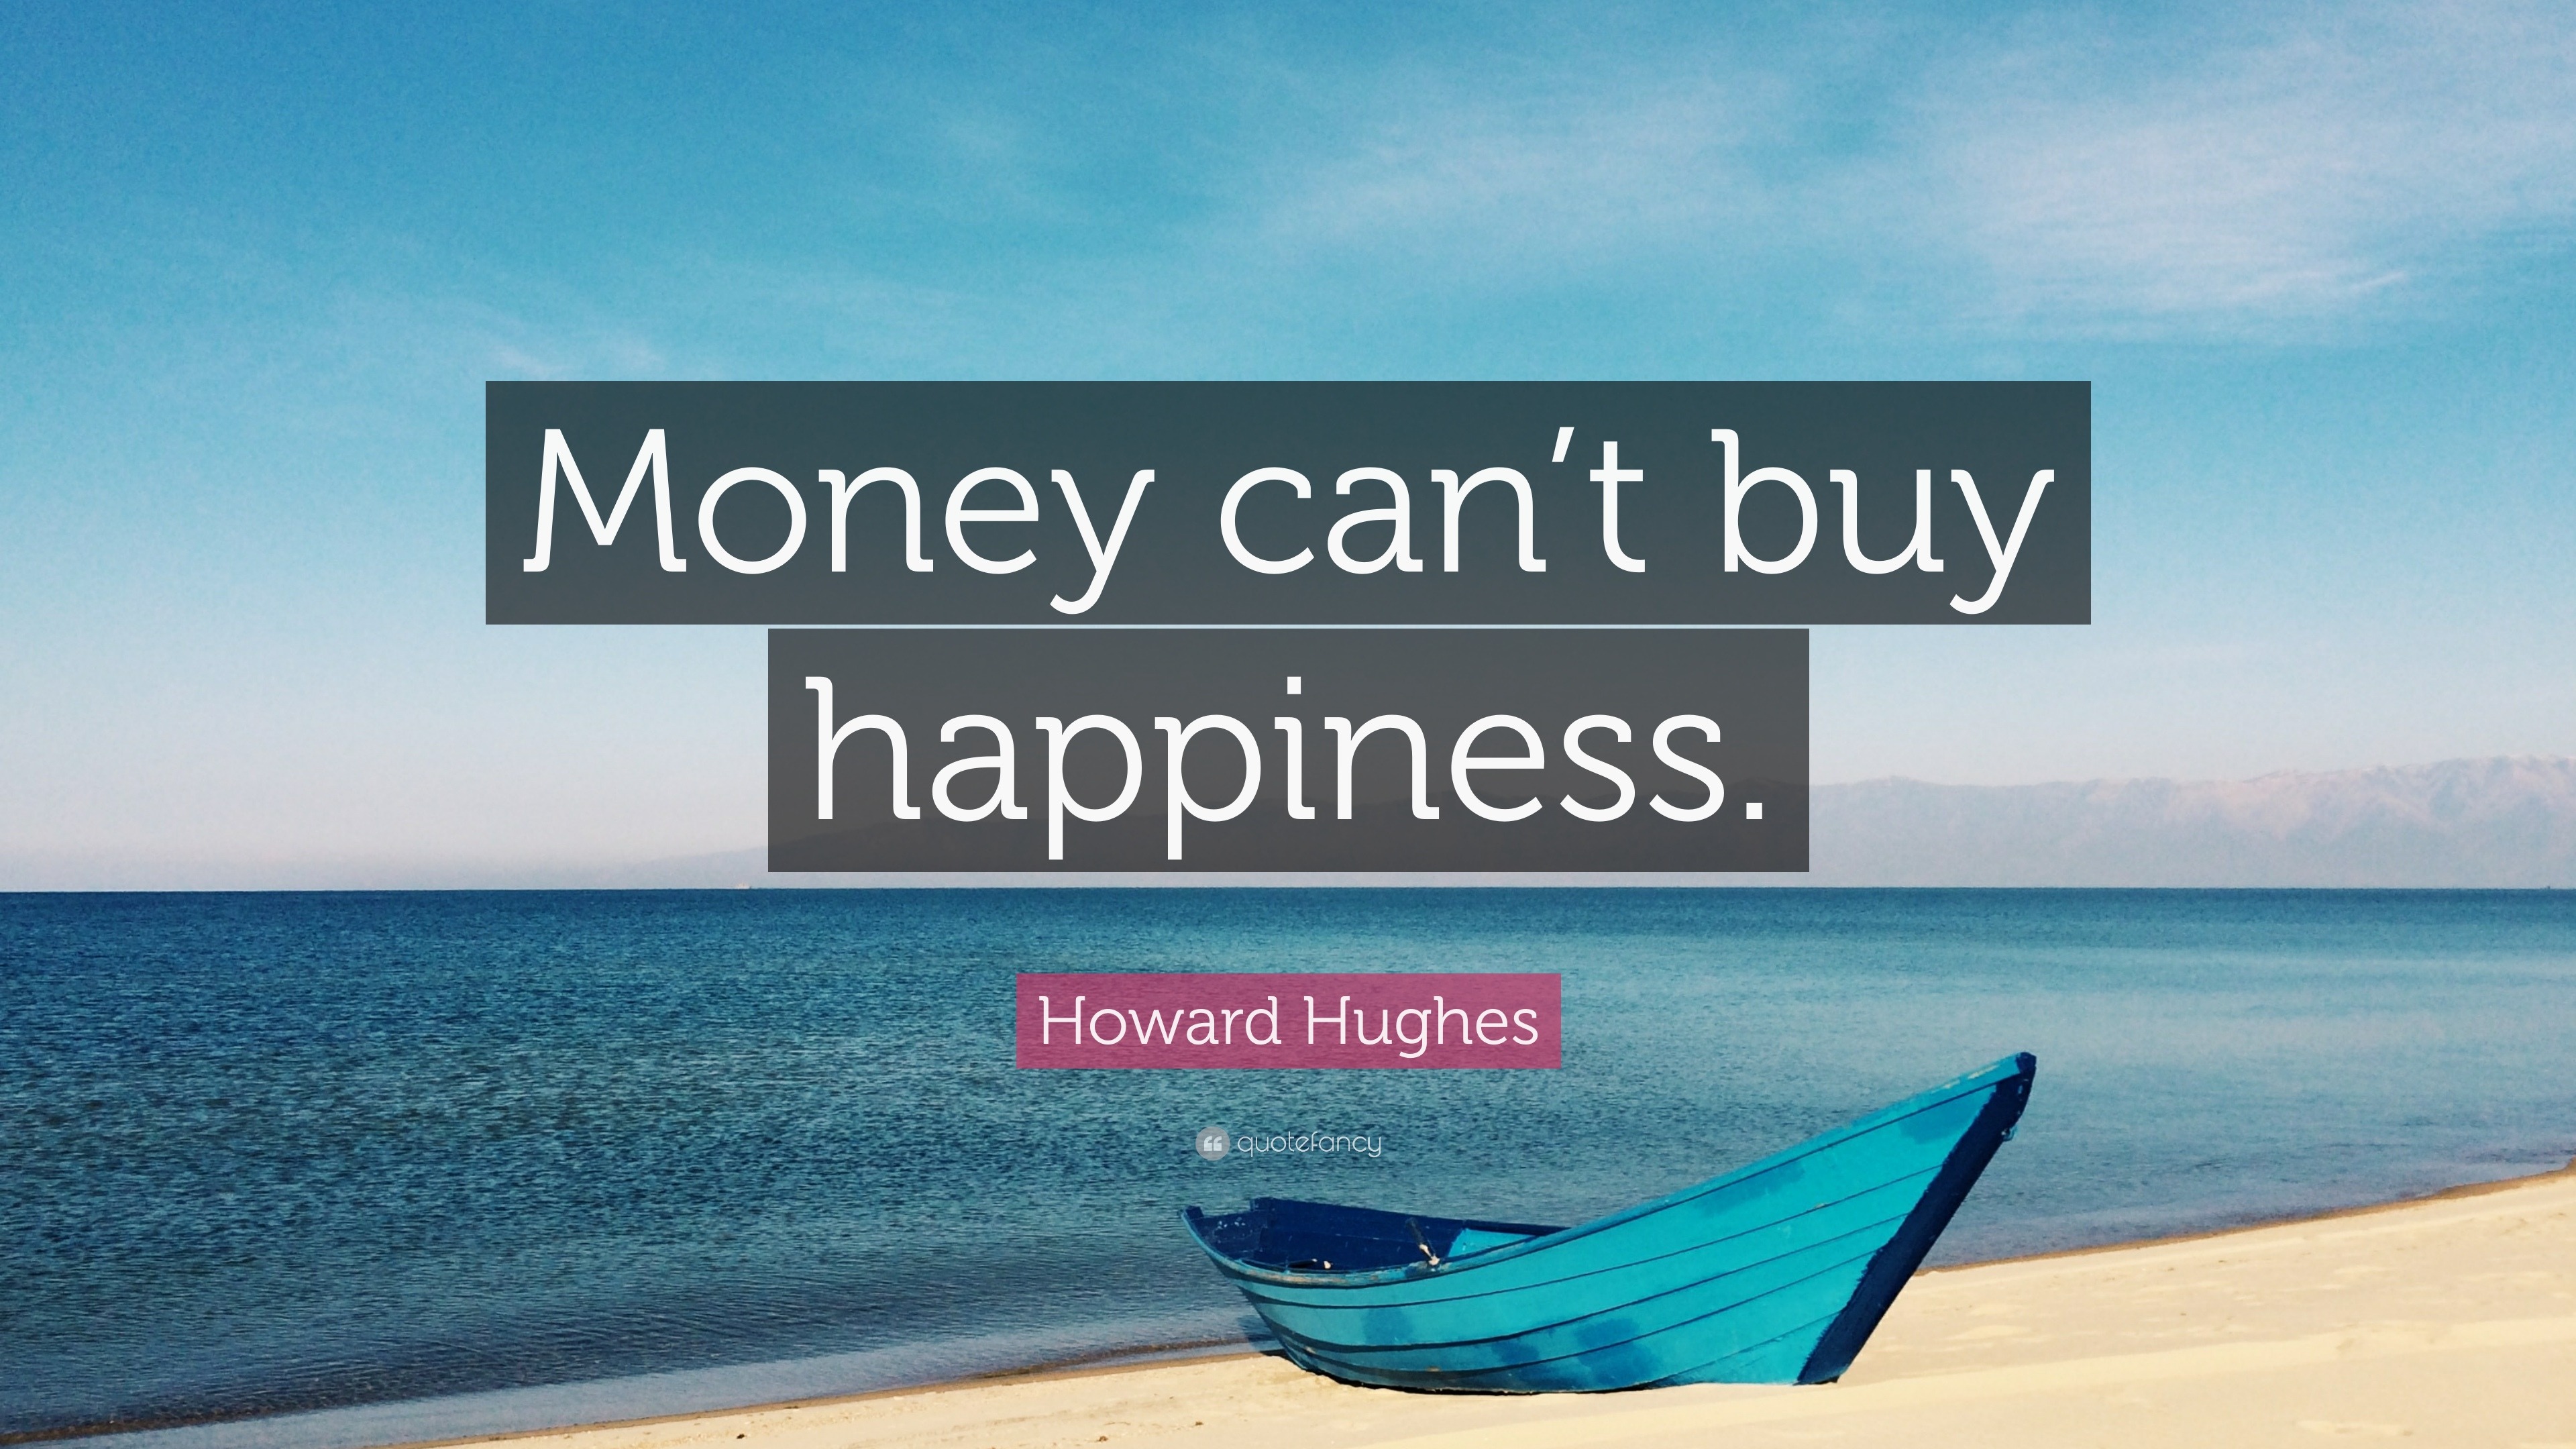 Howard Hughes Quote: “Money can’t buy happiness.”